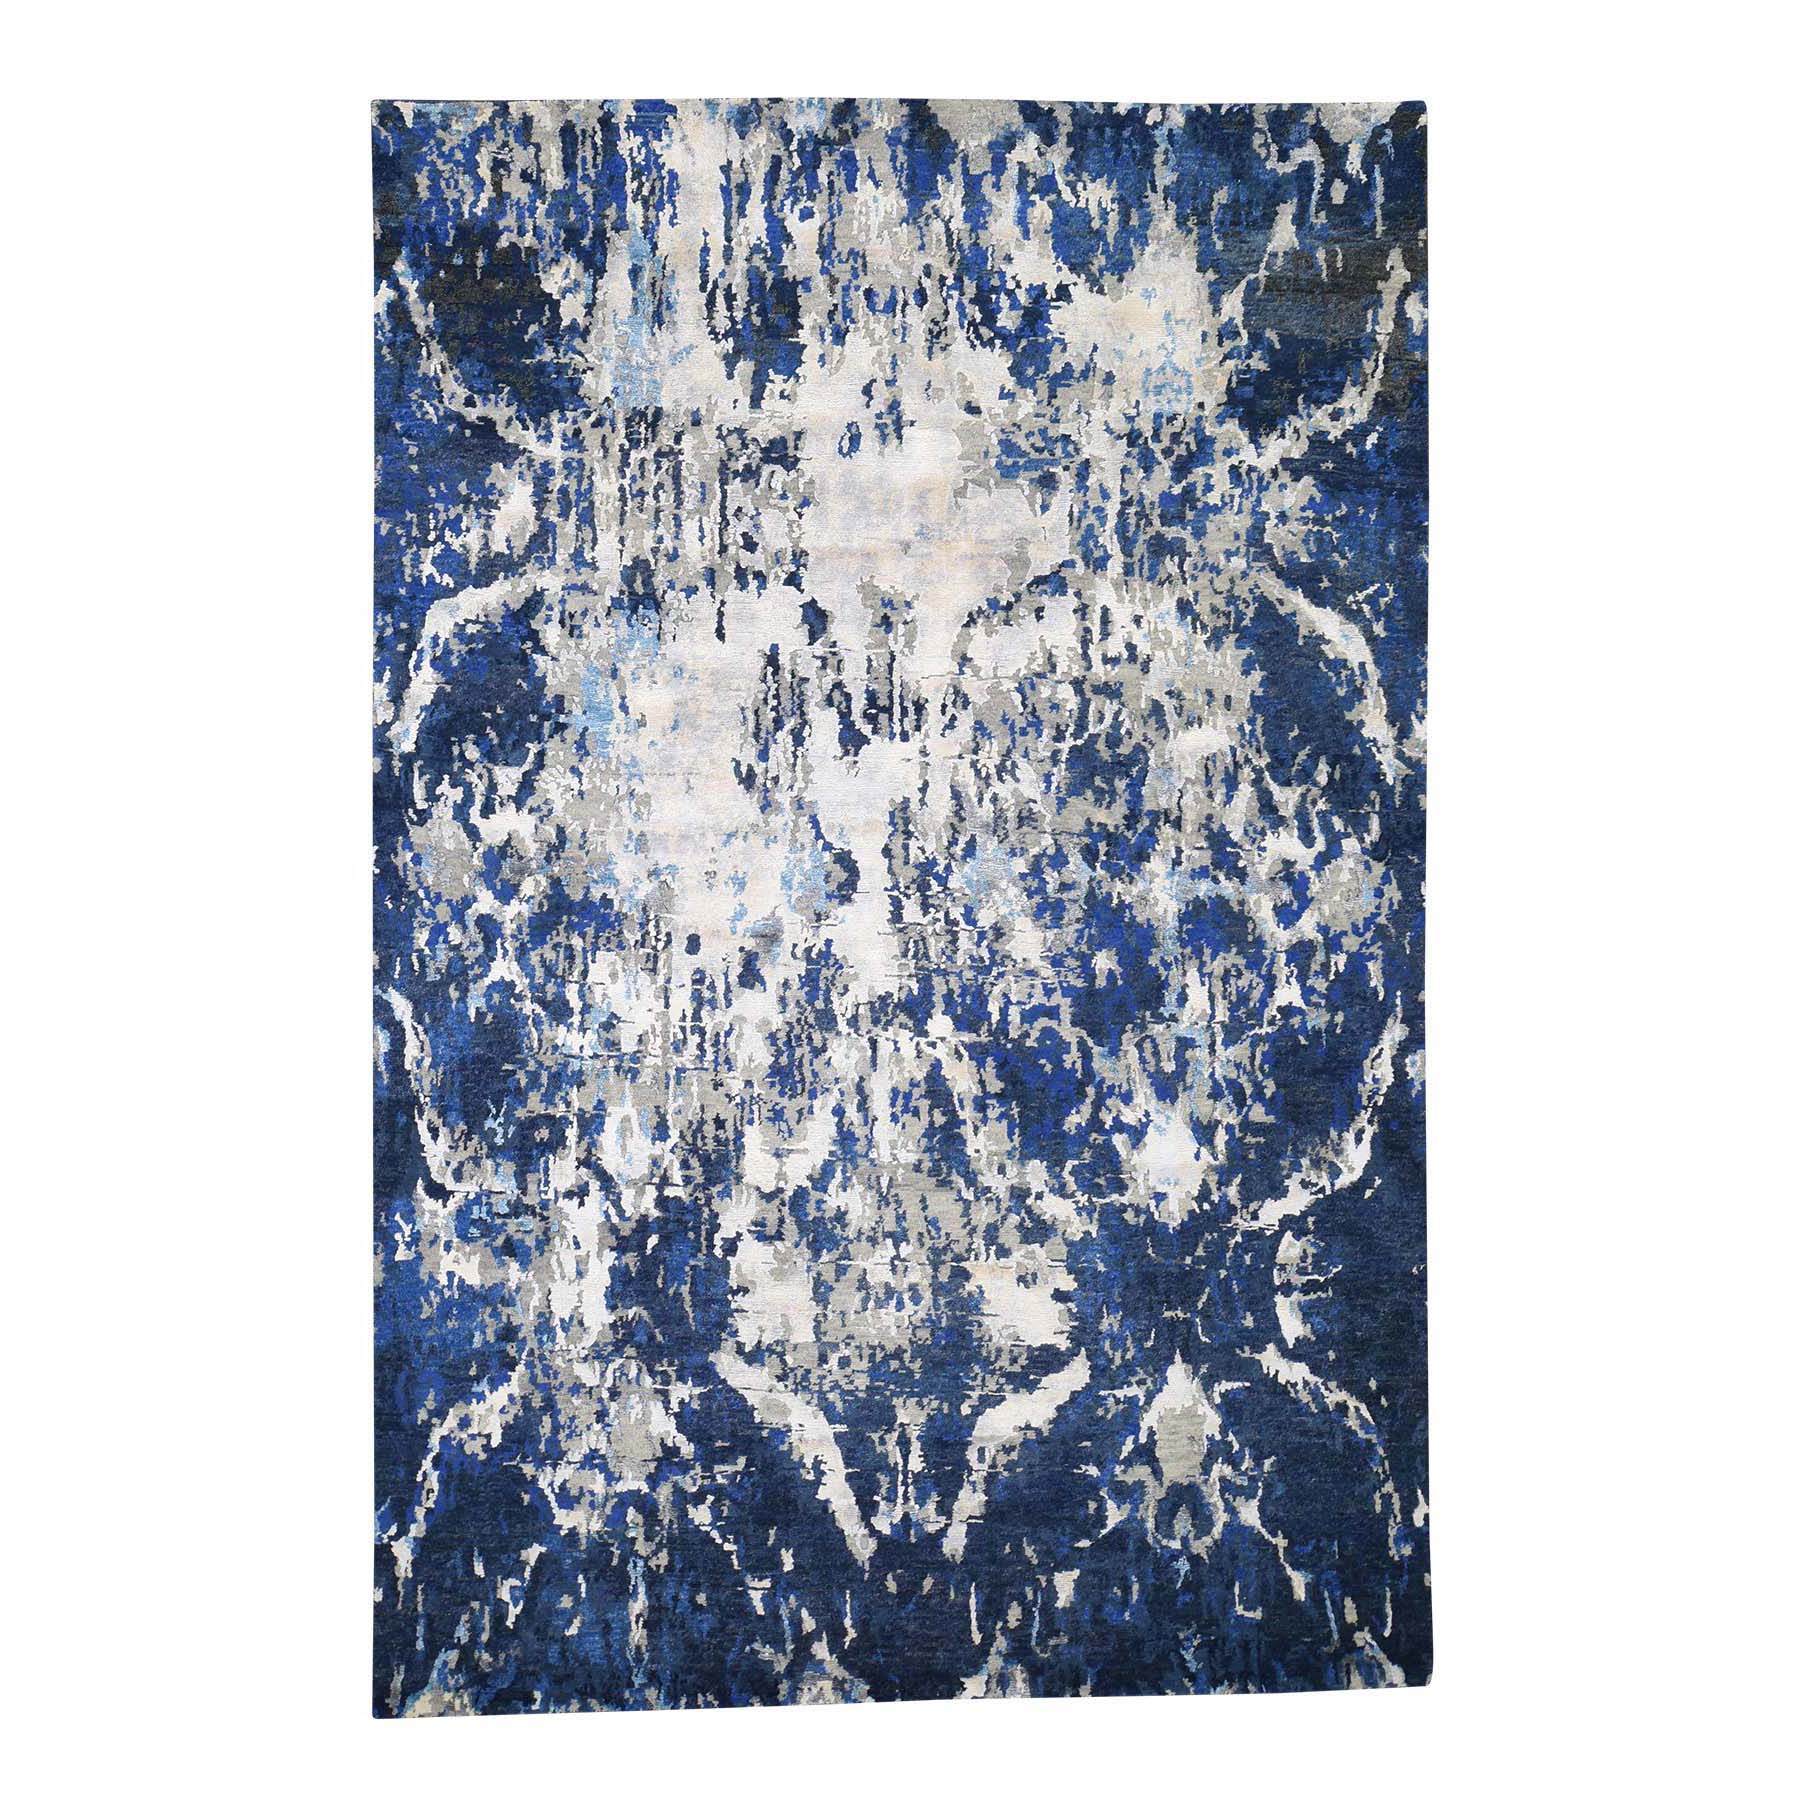 6'X9'1" Abstract Design Hi-Low Pile Wool And Silk Hand-Knotted Modern Rug moadd6bc